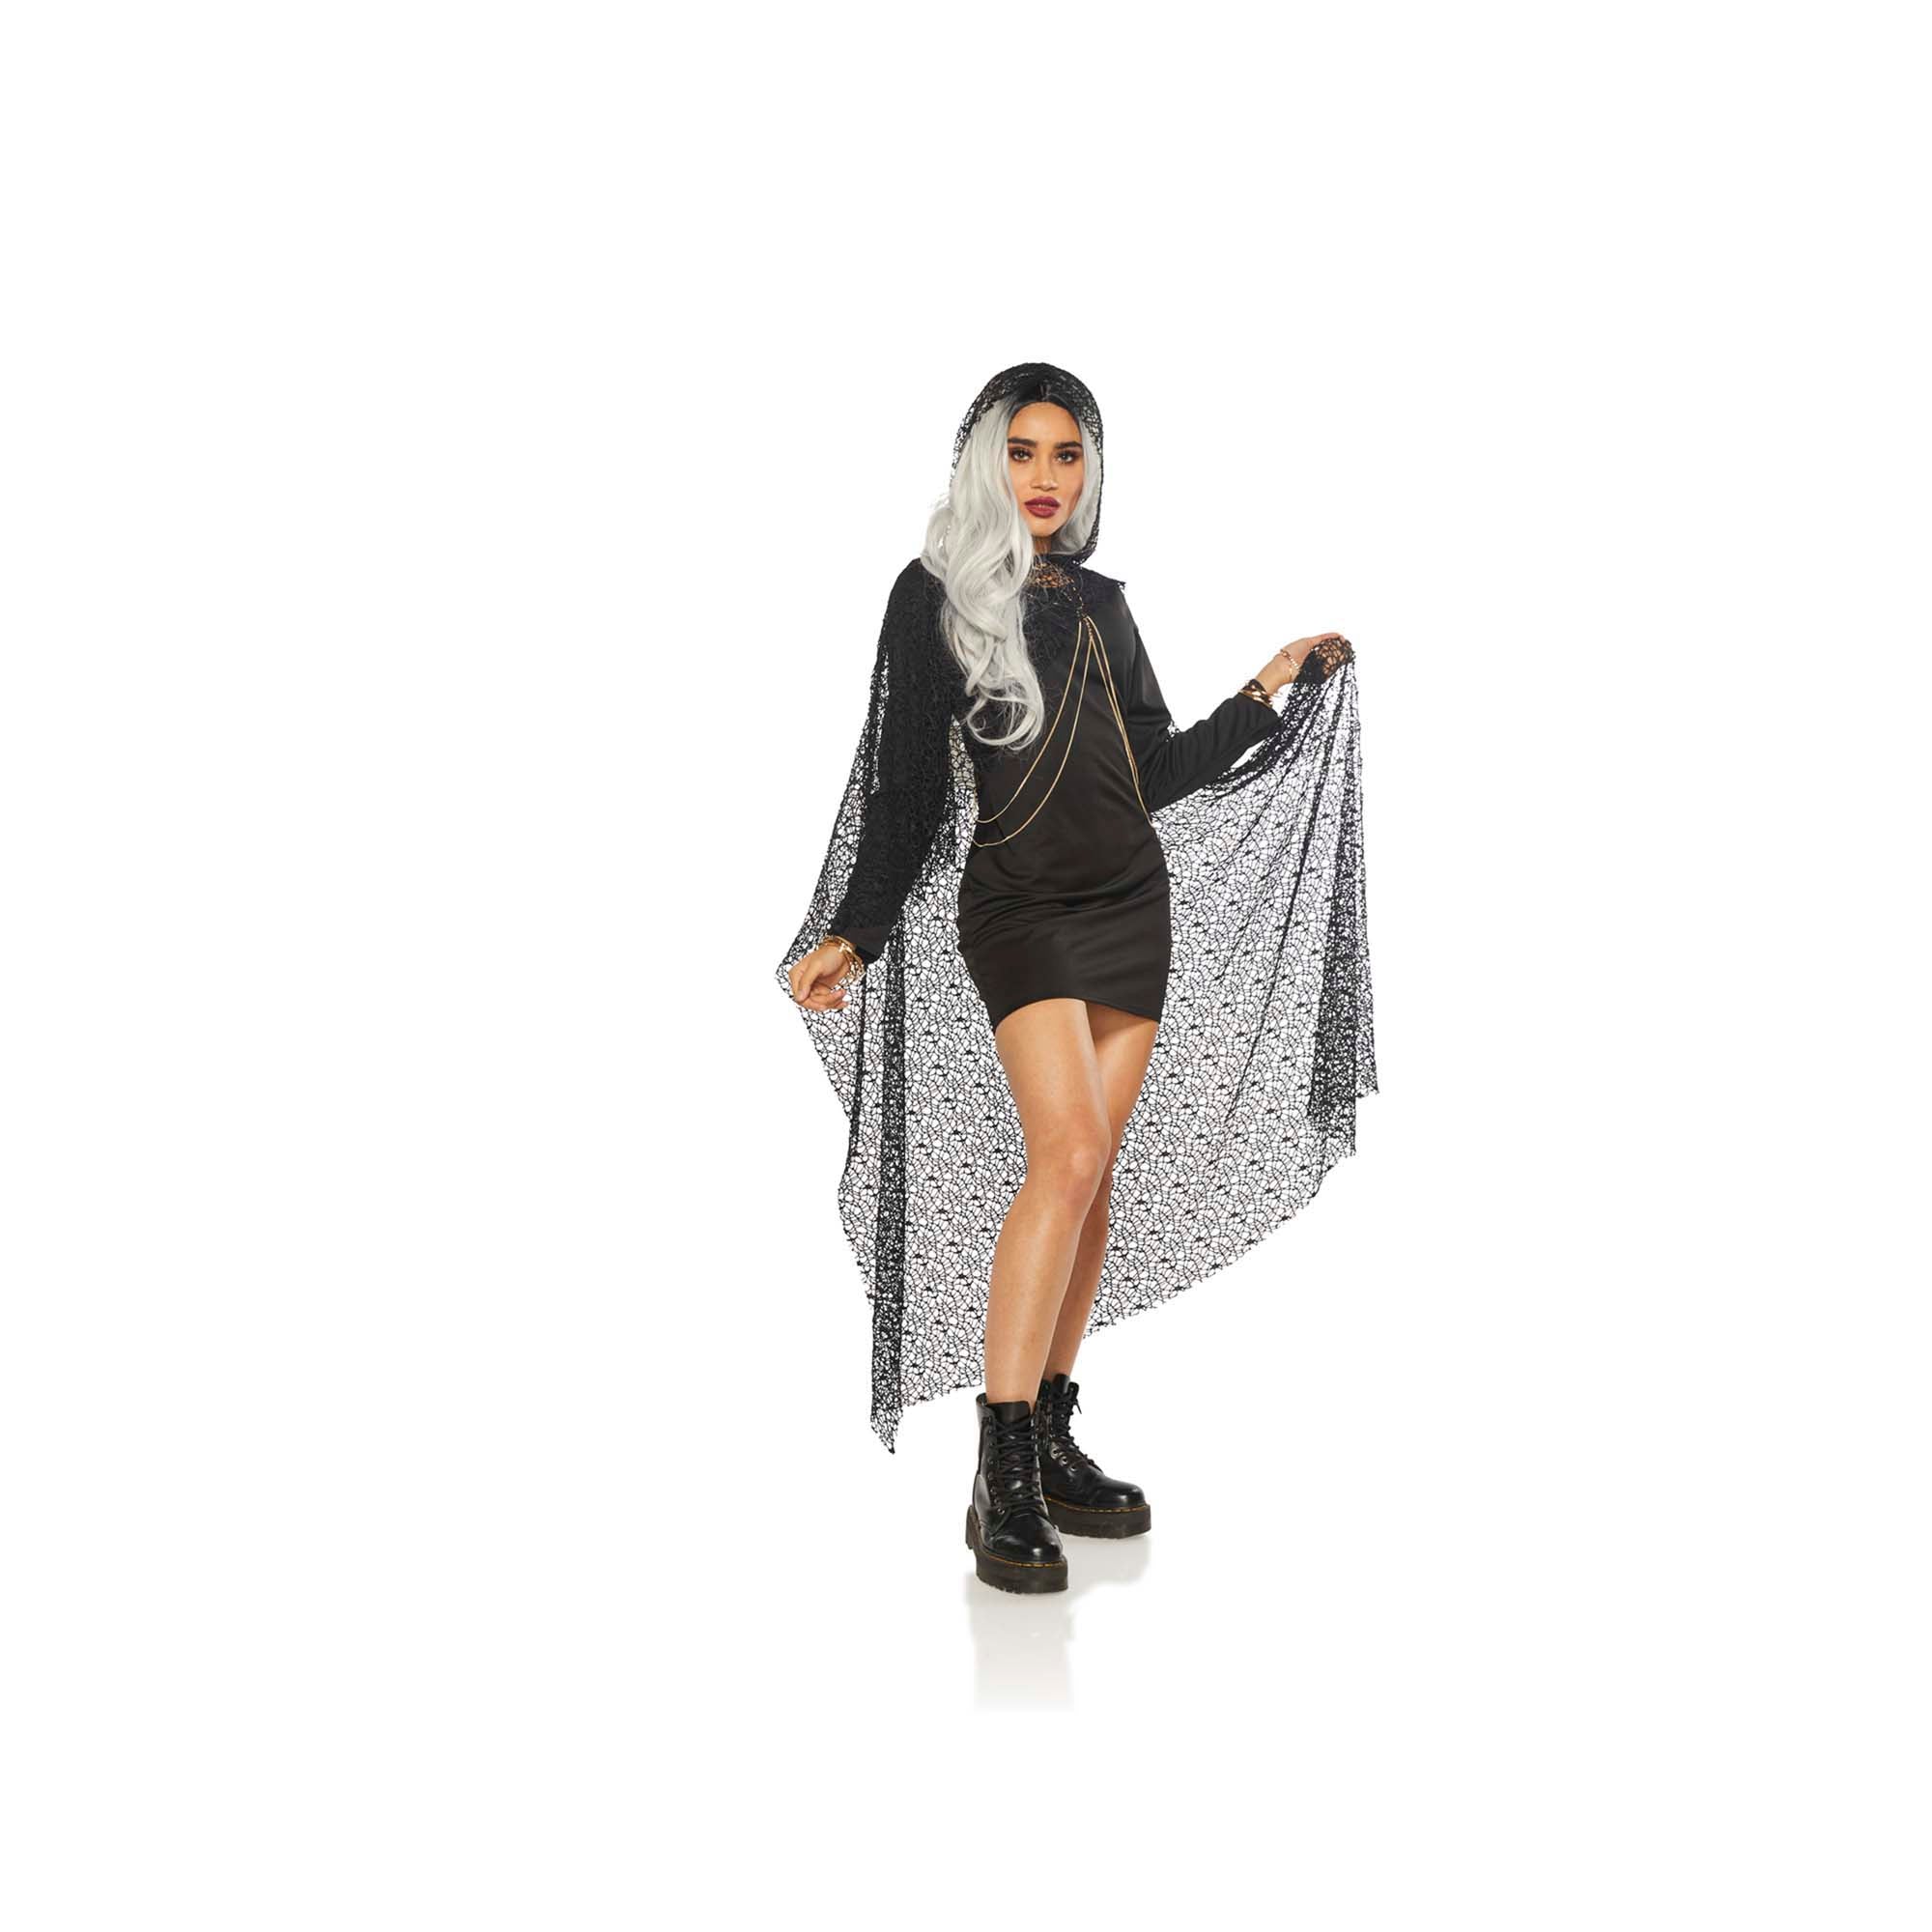 Adult Coven Witch Hooded Dress 